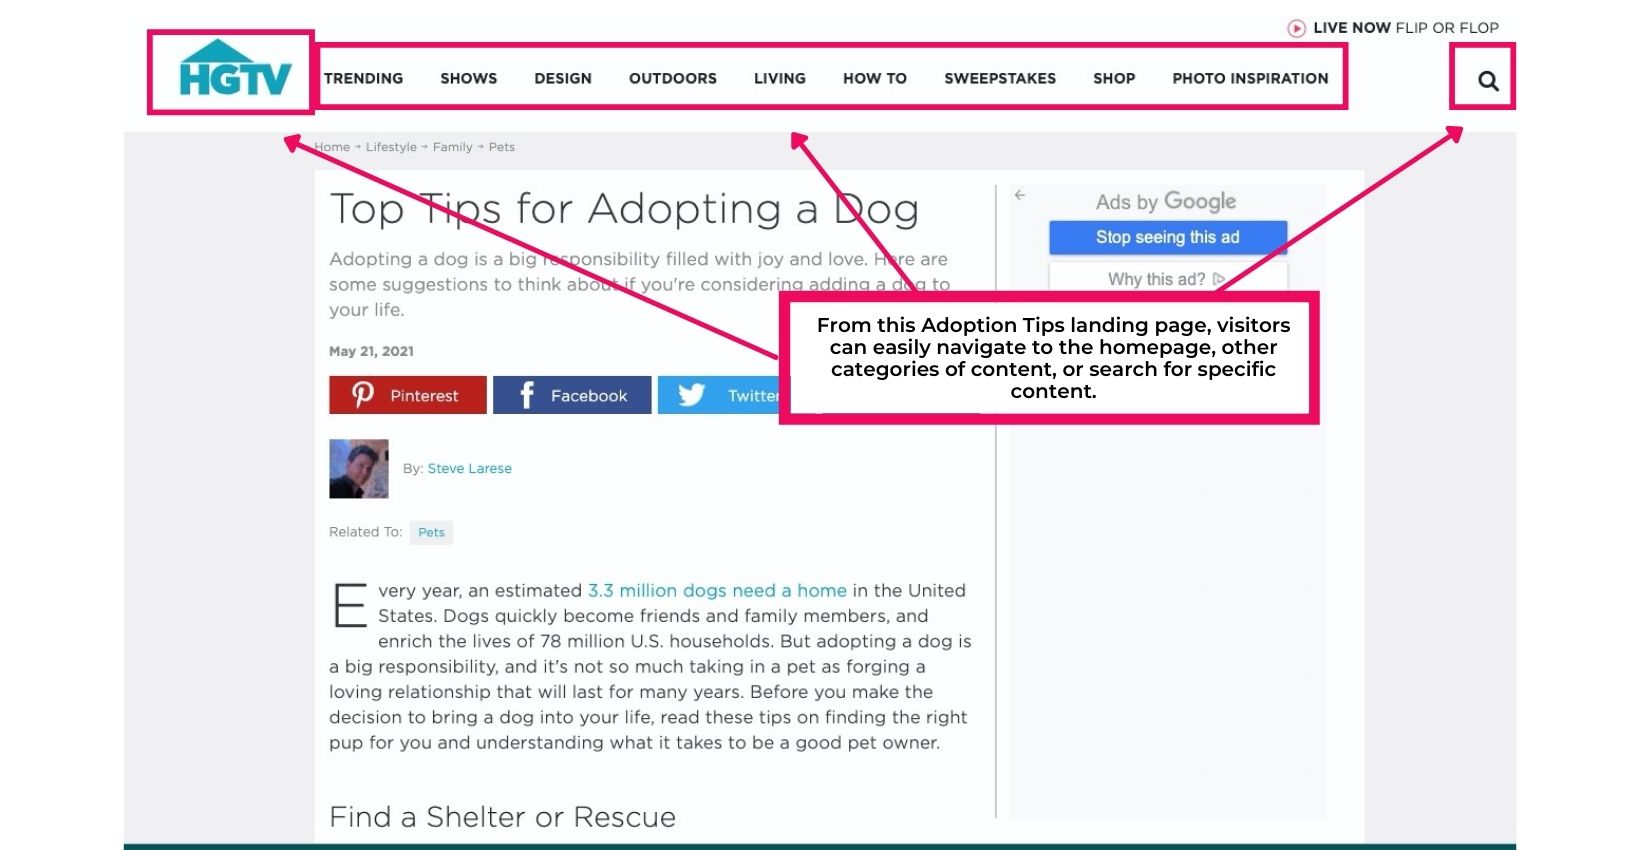  A landing page for HGTV on tips for adopting a dog. A pink box around the navigation menu.